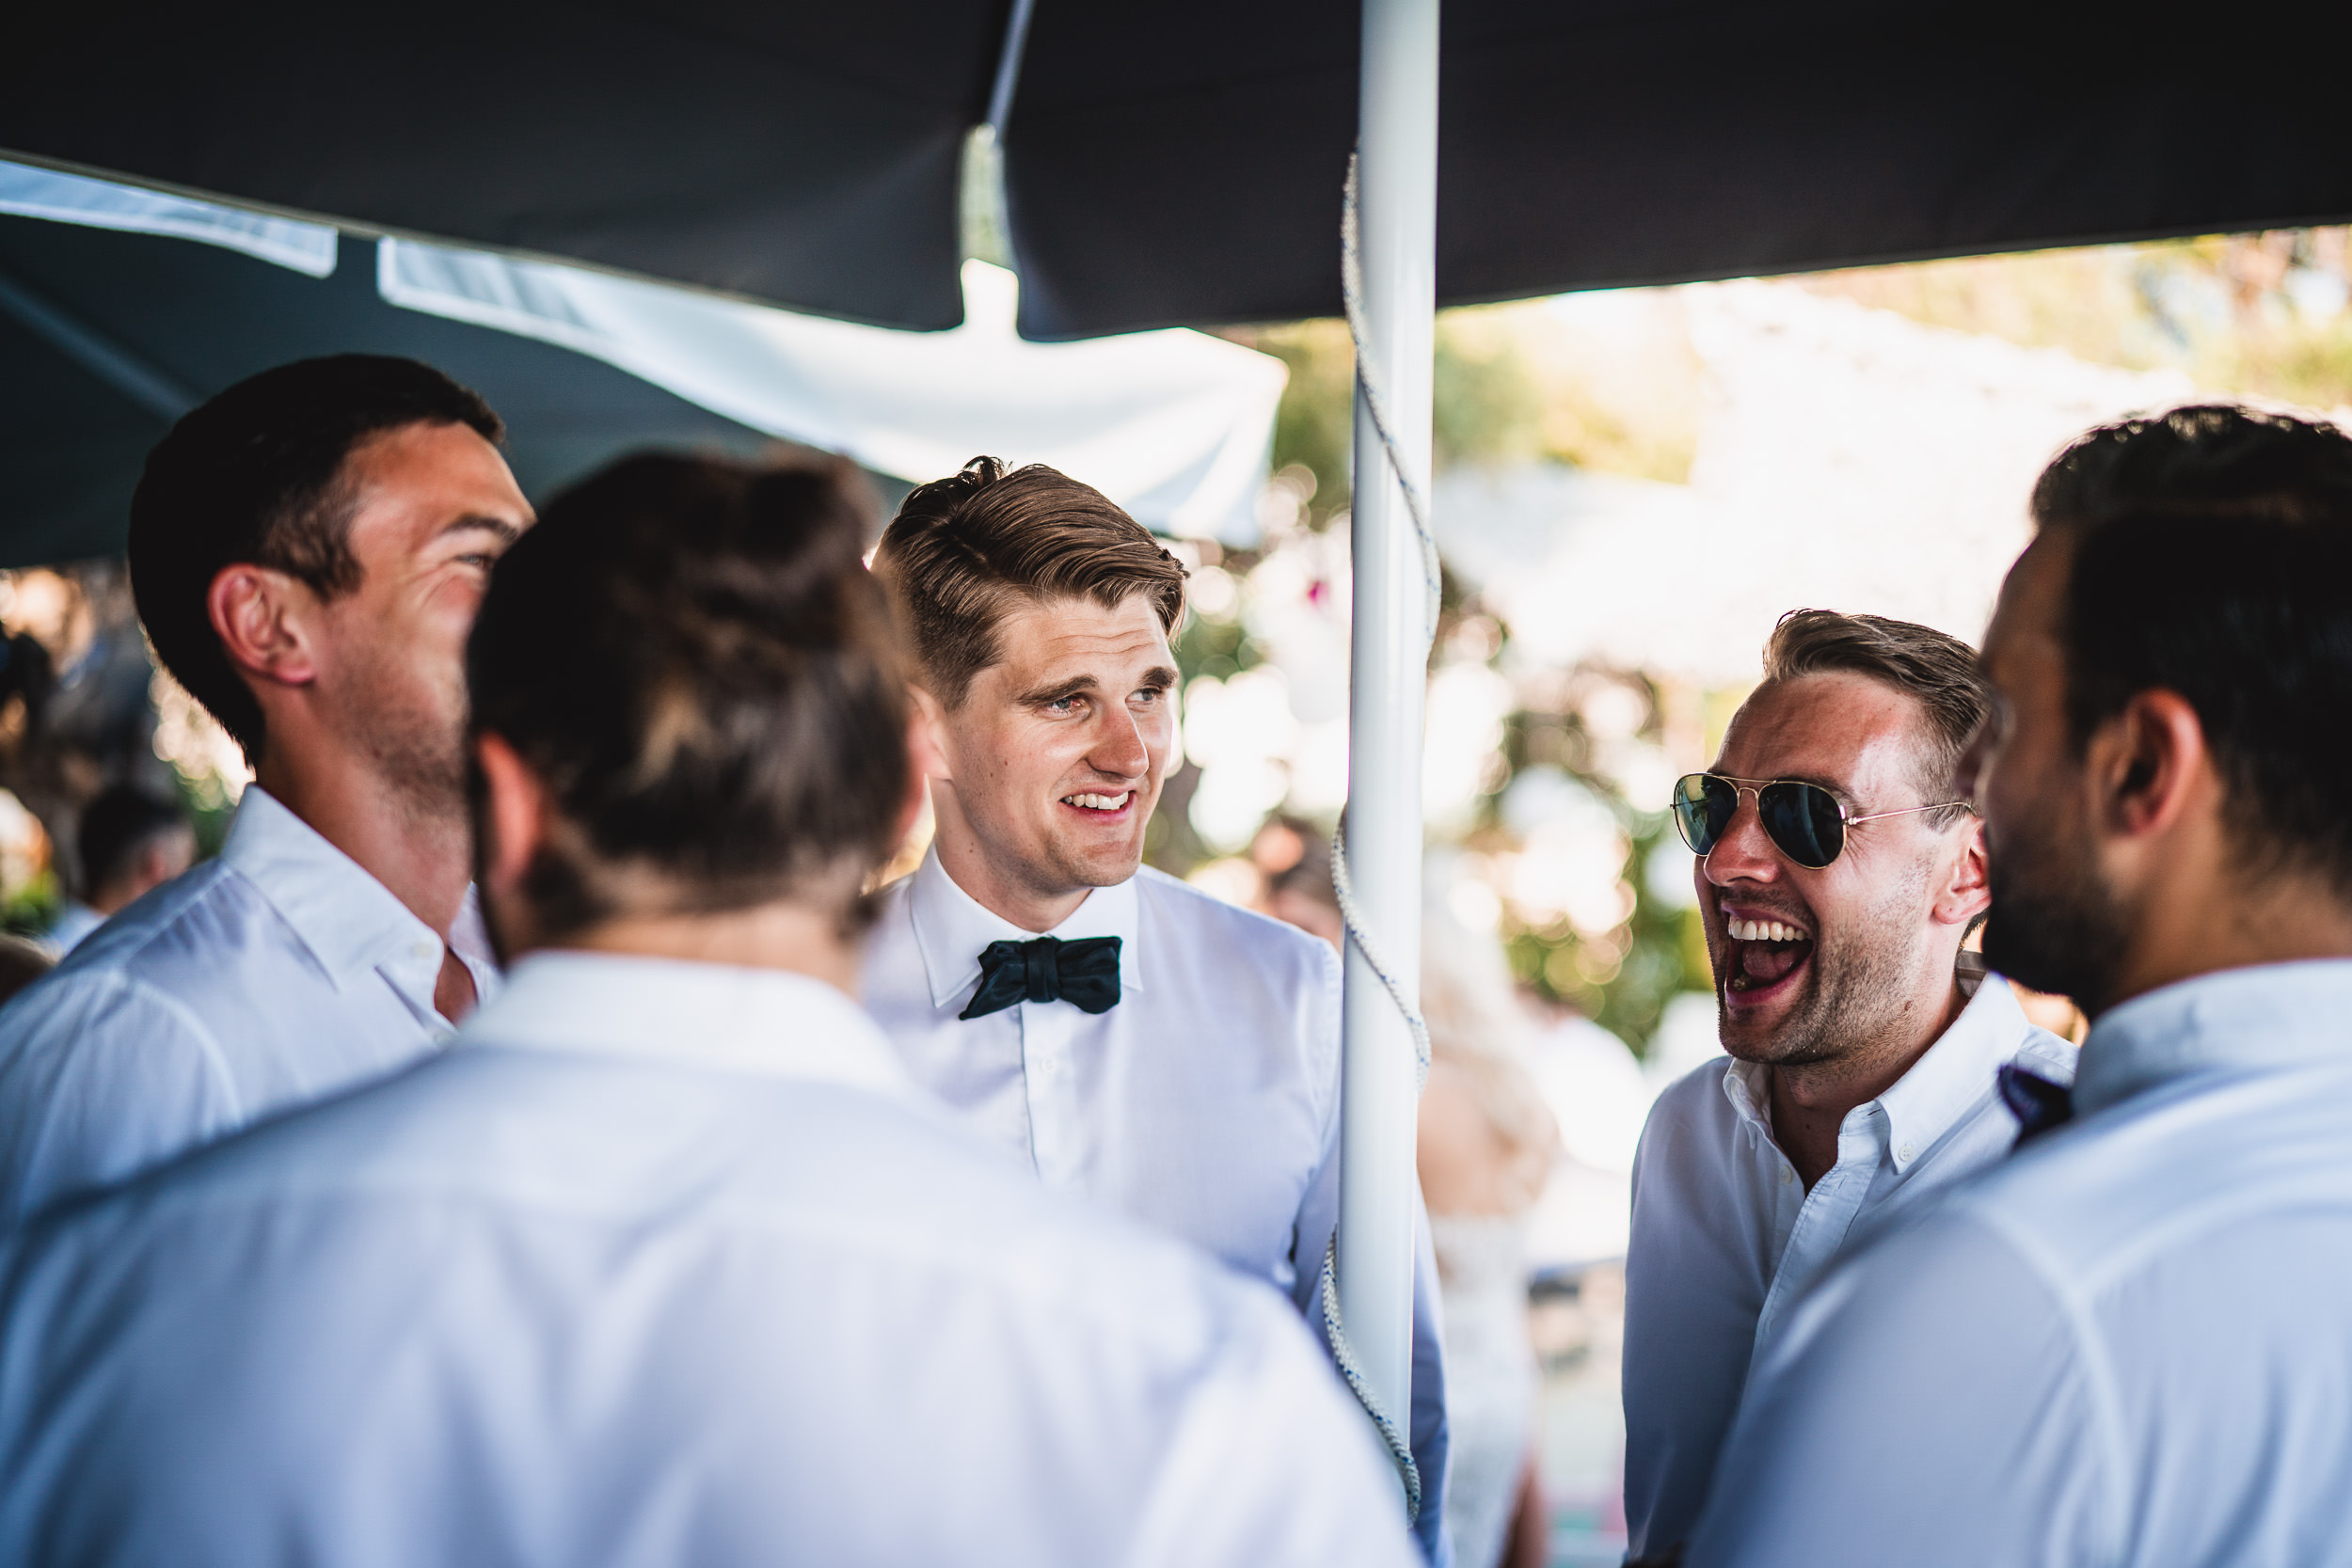 A group of groomsmen laughing at each other during a wedding photo shoot.